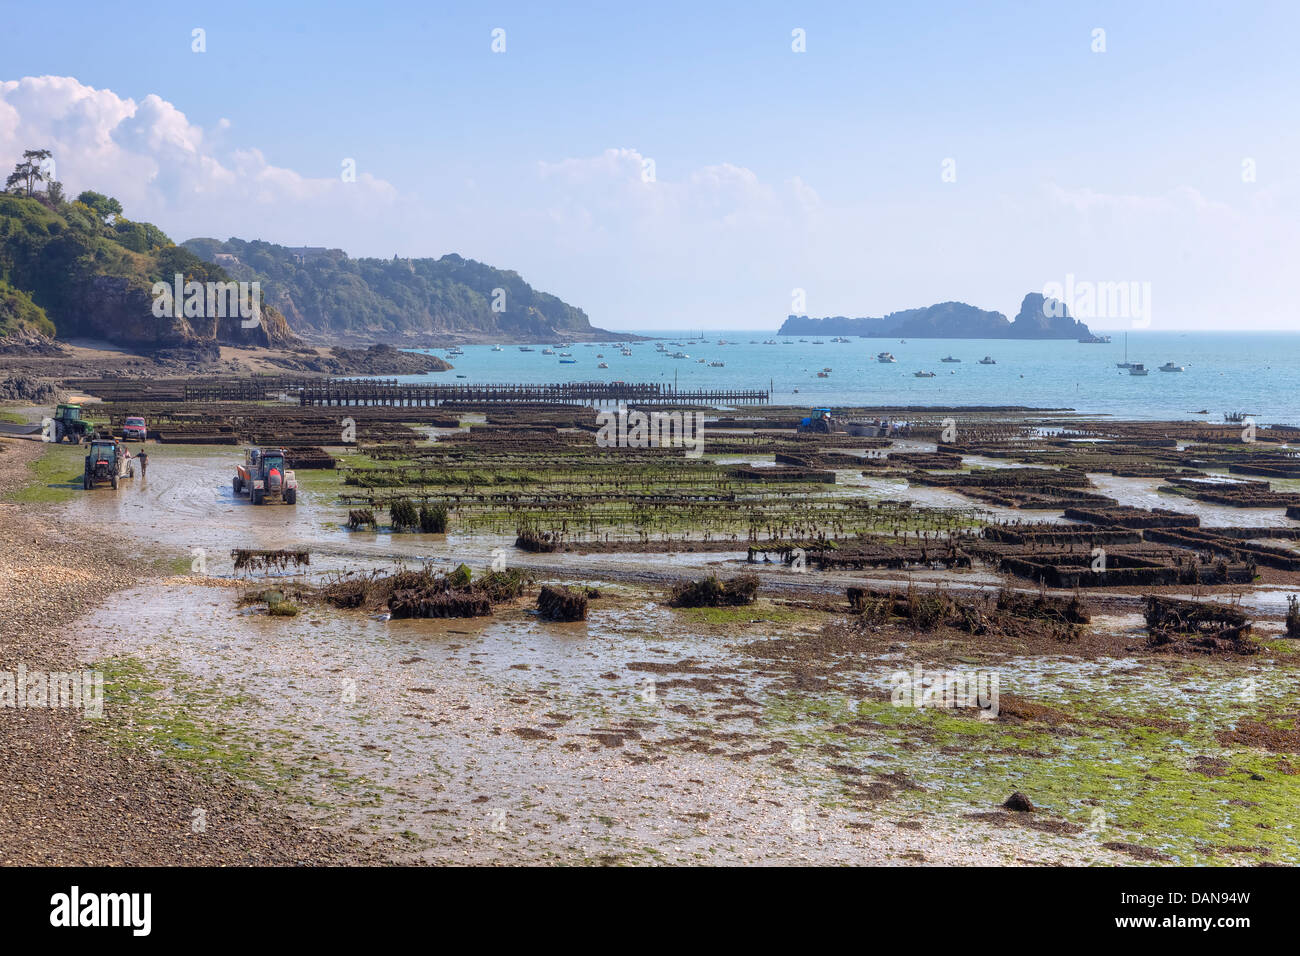 oyster farming in Cancale, Brittany, France Stock Photo